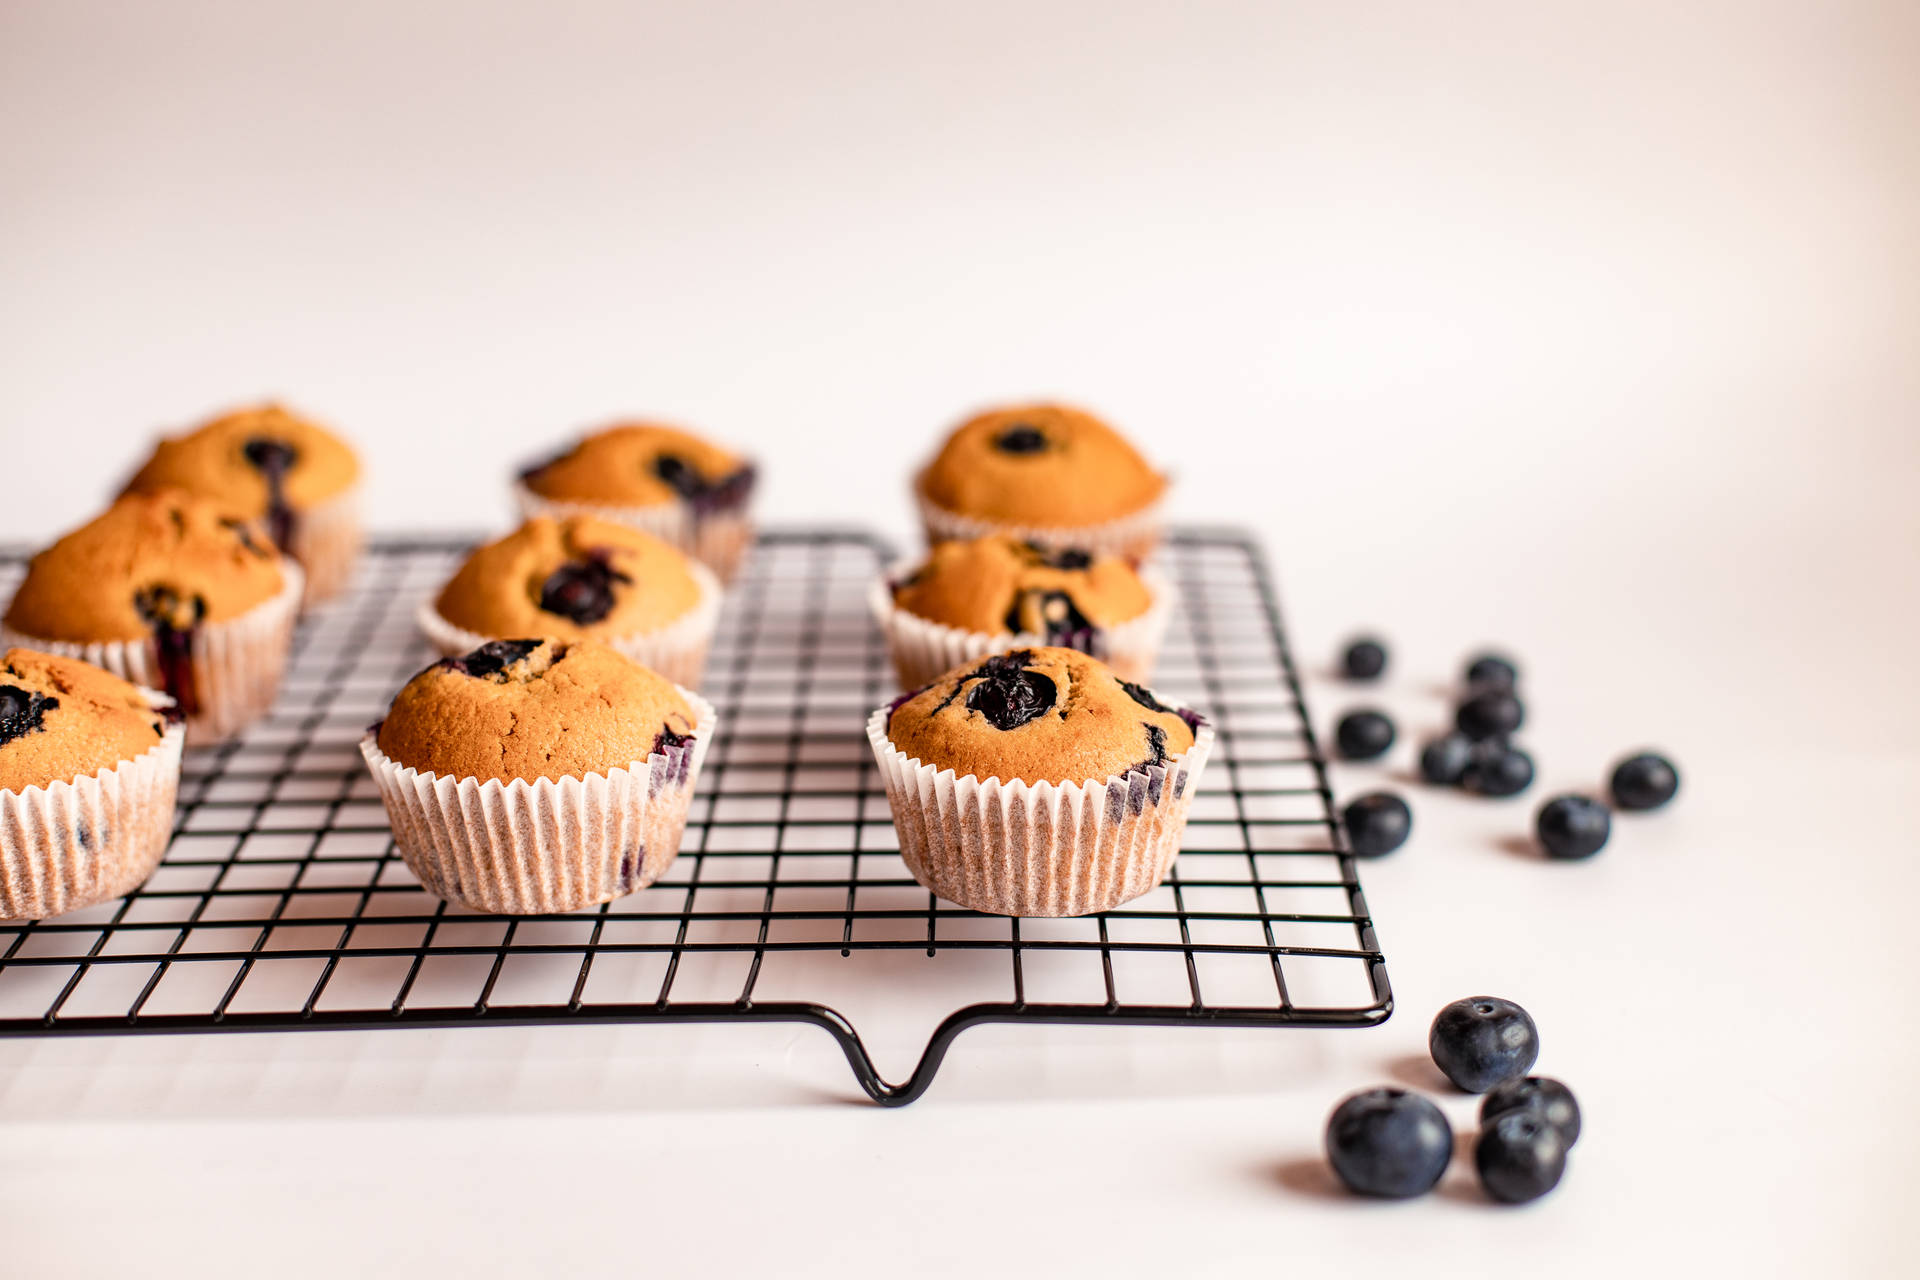 Muffin Wallpaper Images